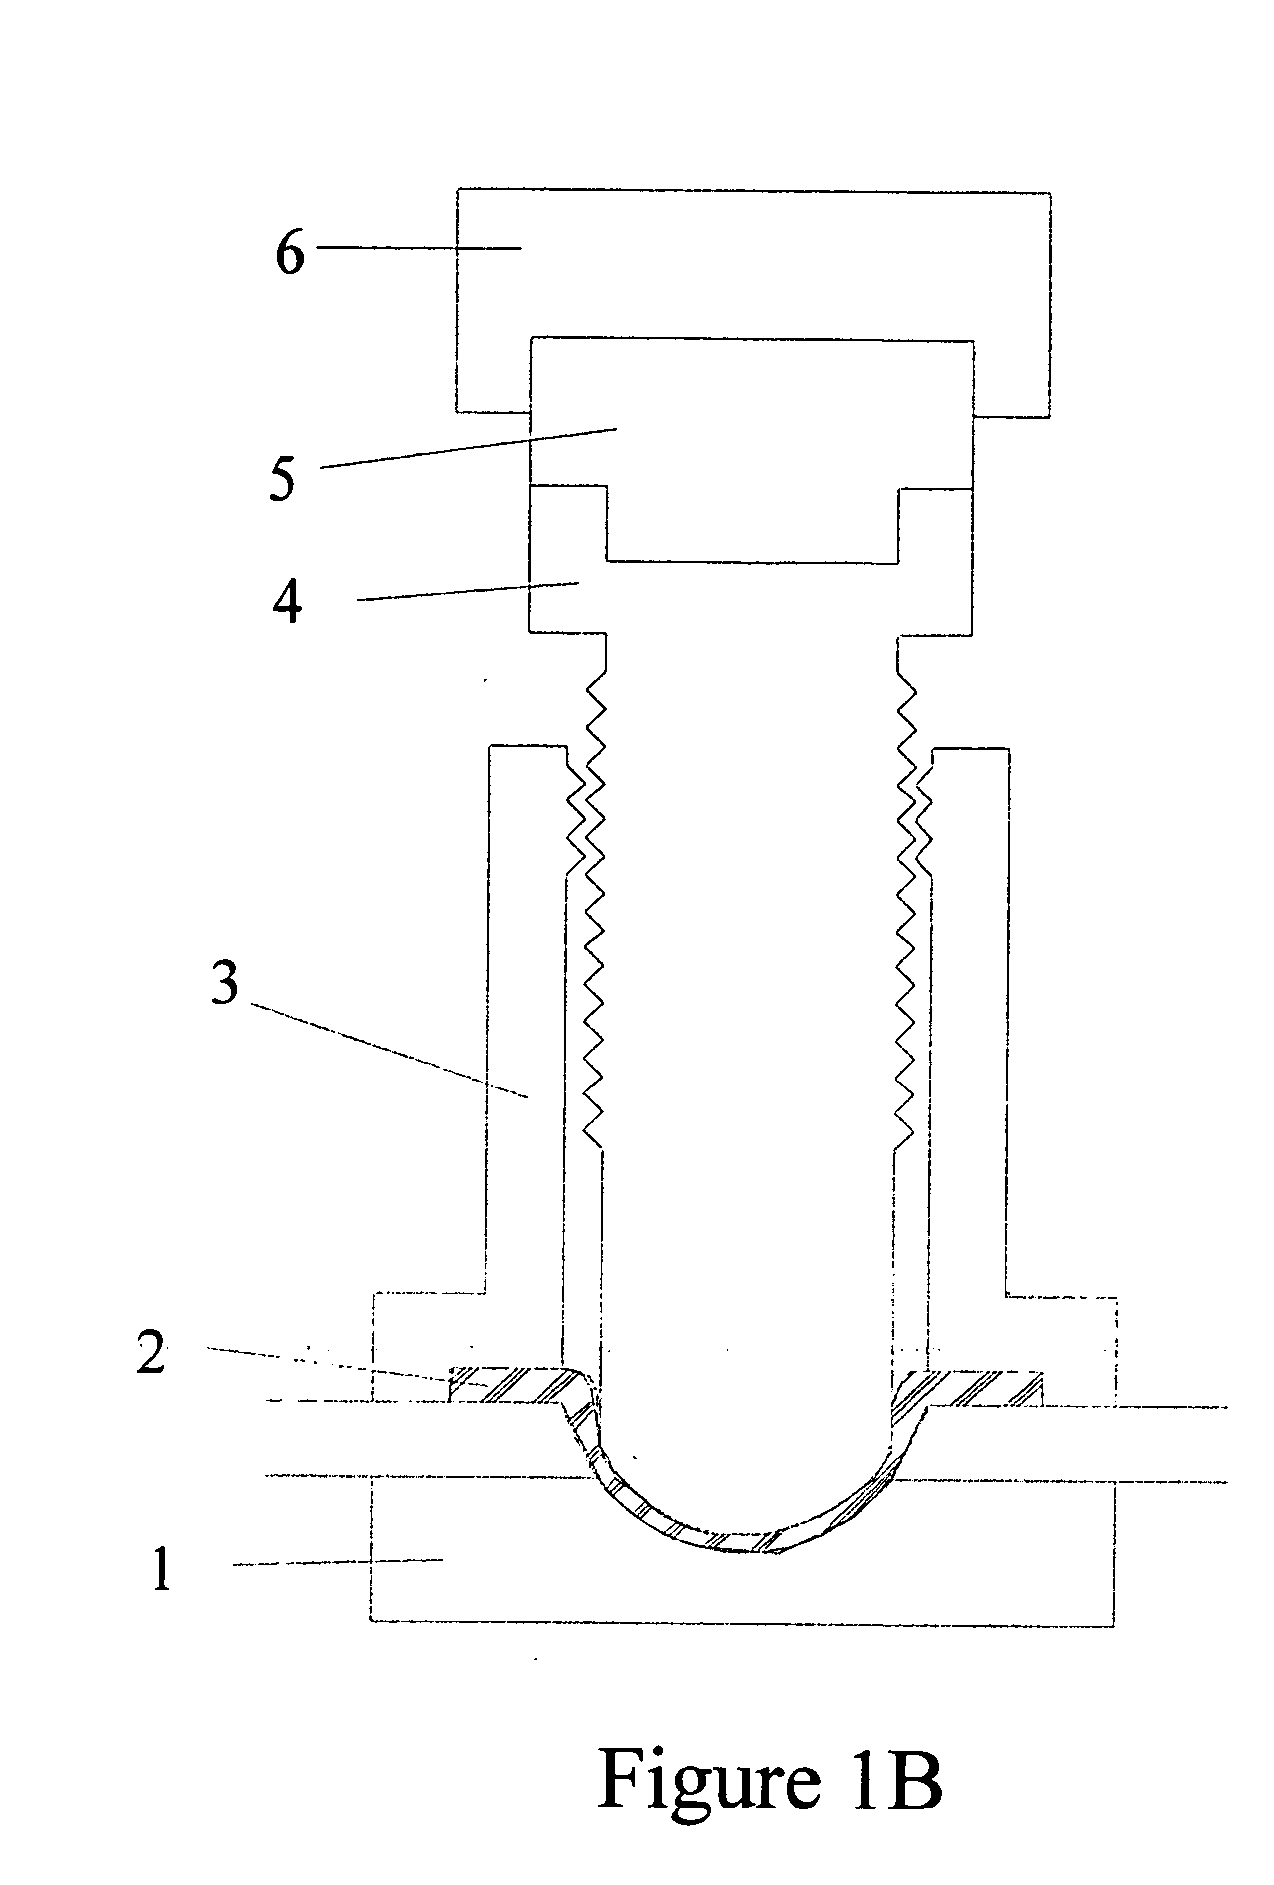 Torque sensitive sanitary diaphragm valves for use in the pharmaceutical industry and methods related thereto